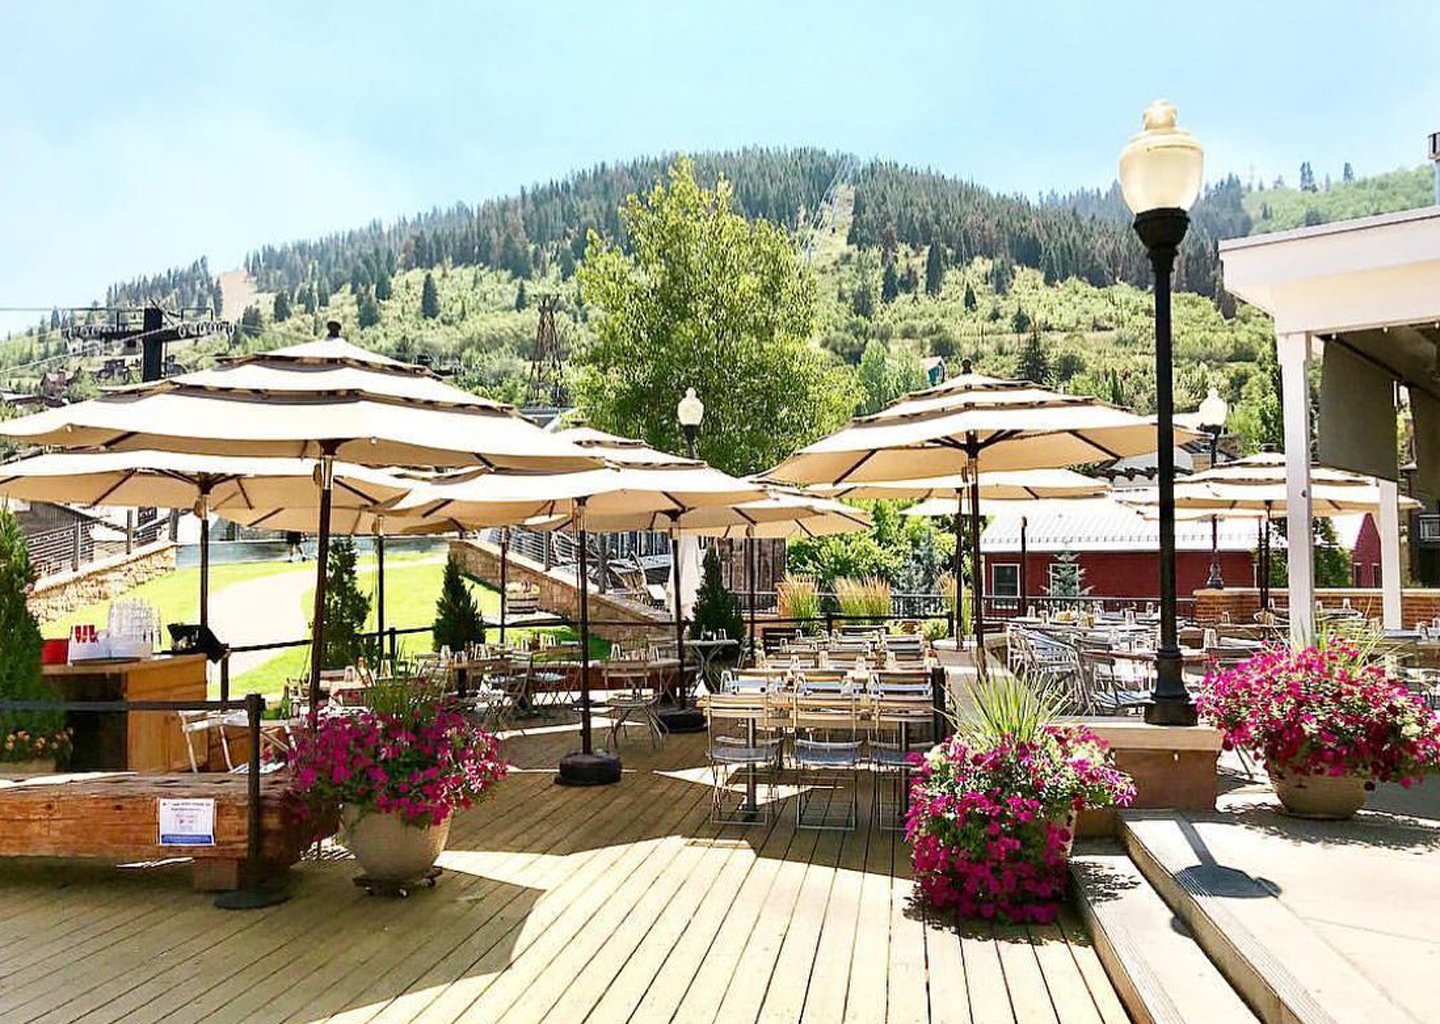 The Outdoor Patio at Bridge Cafe During Summer in Park City, Overlooking The Lifts